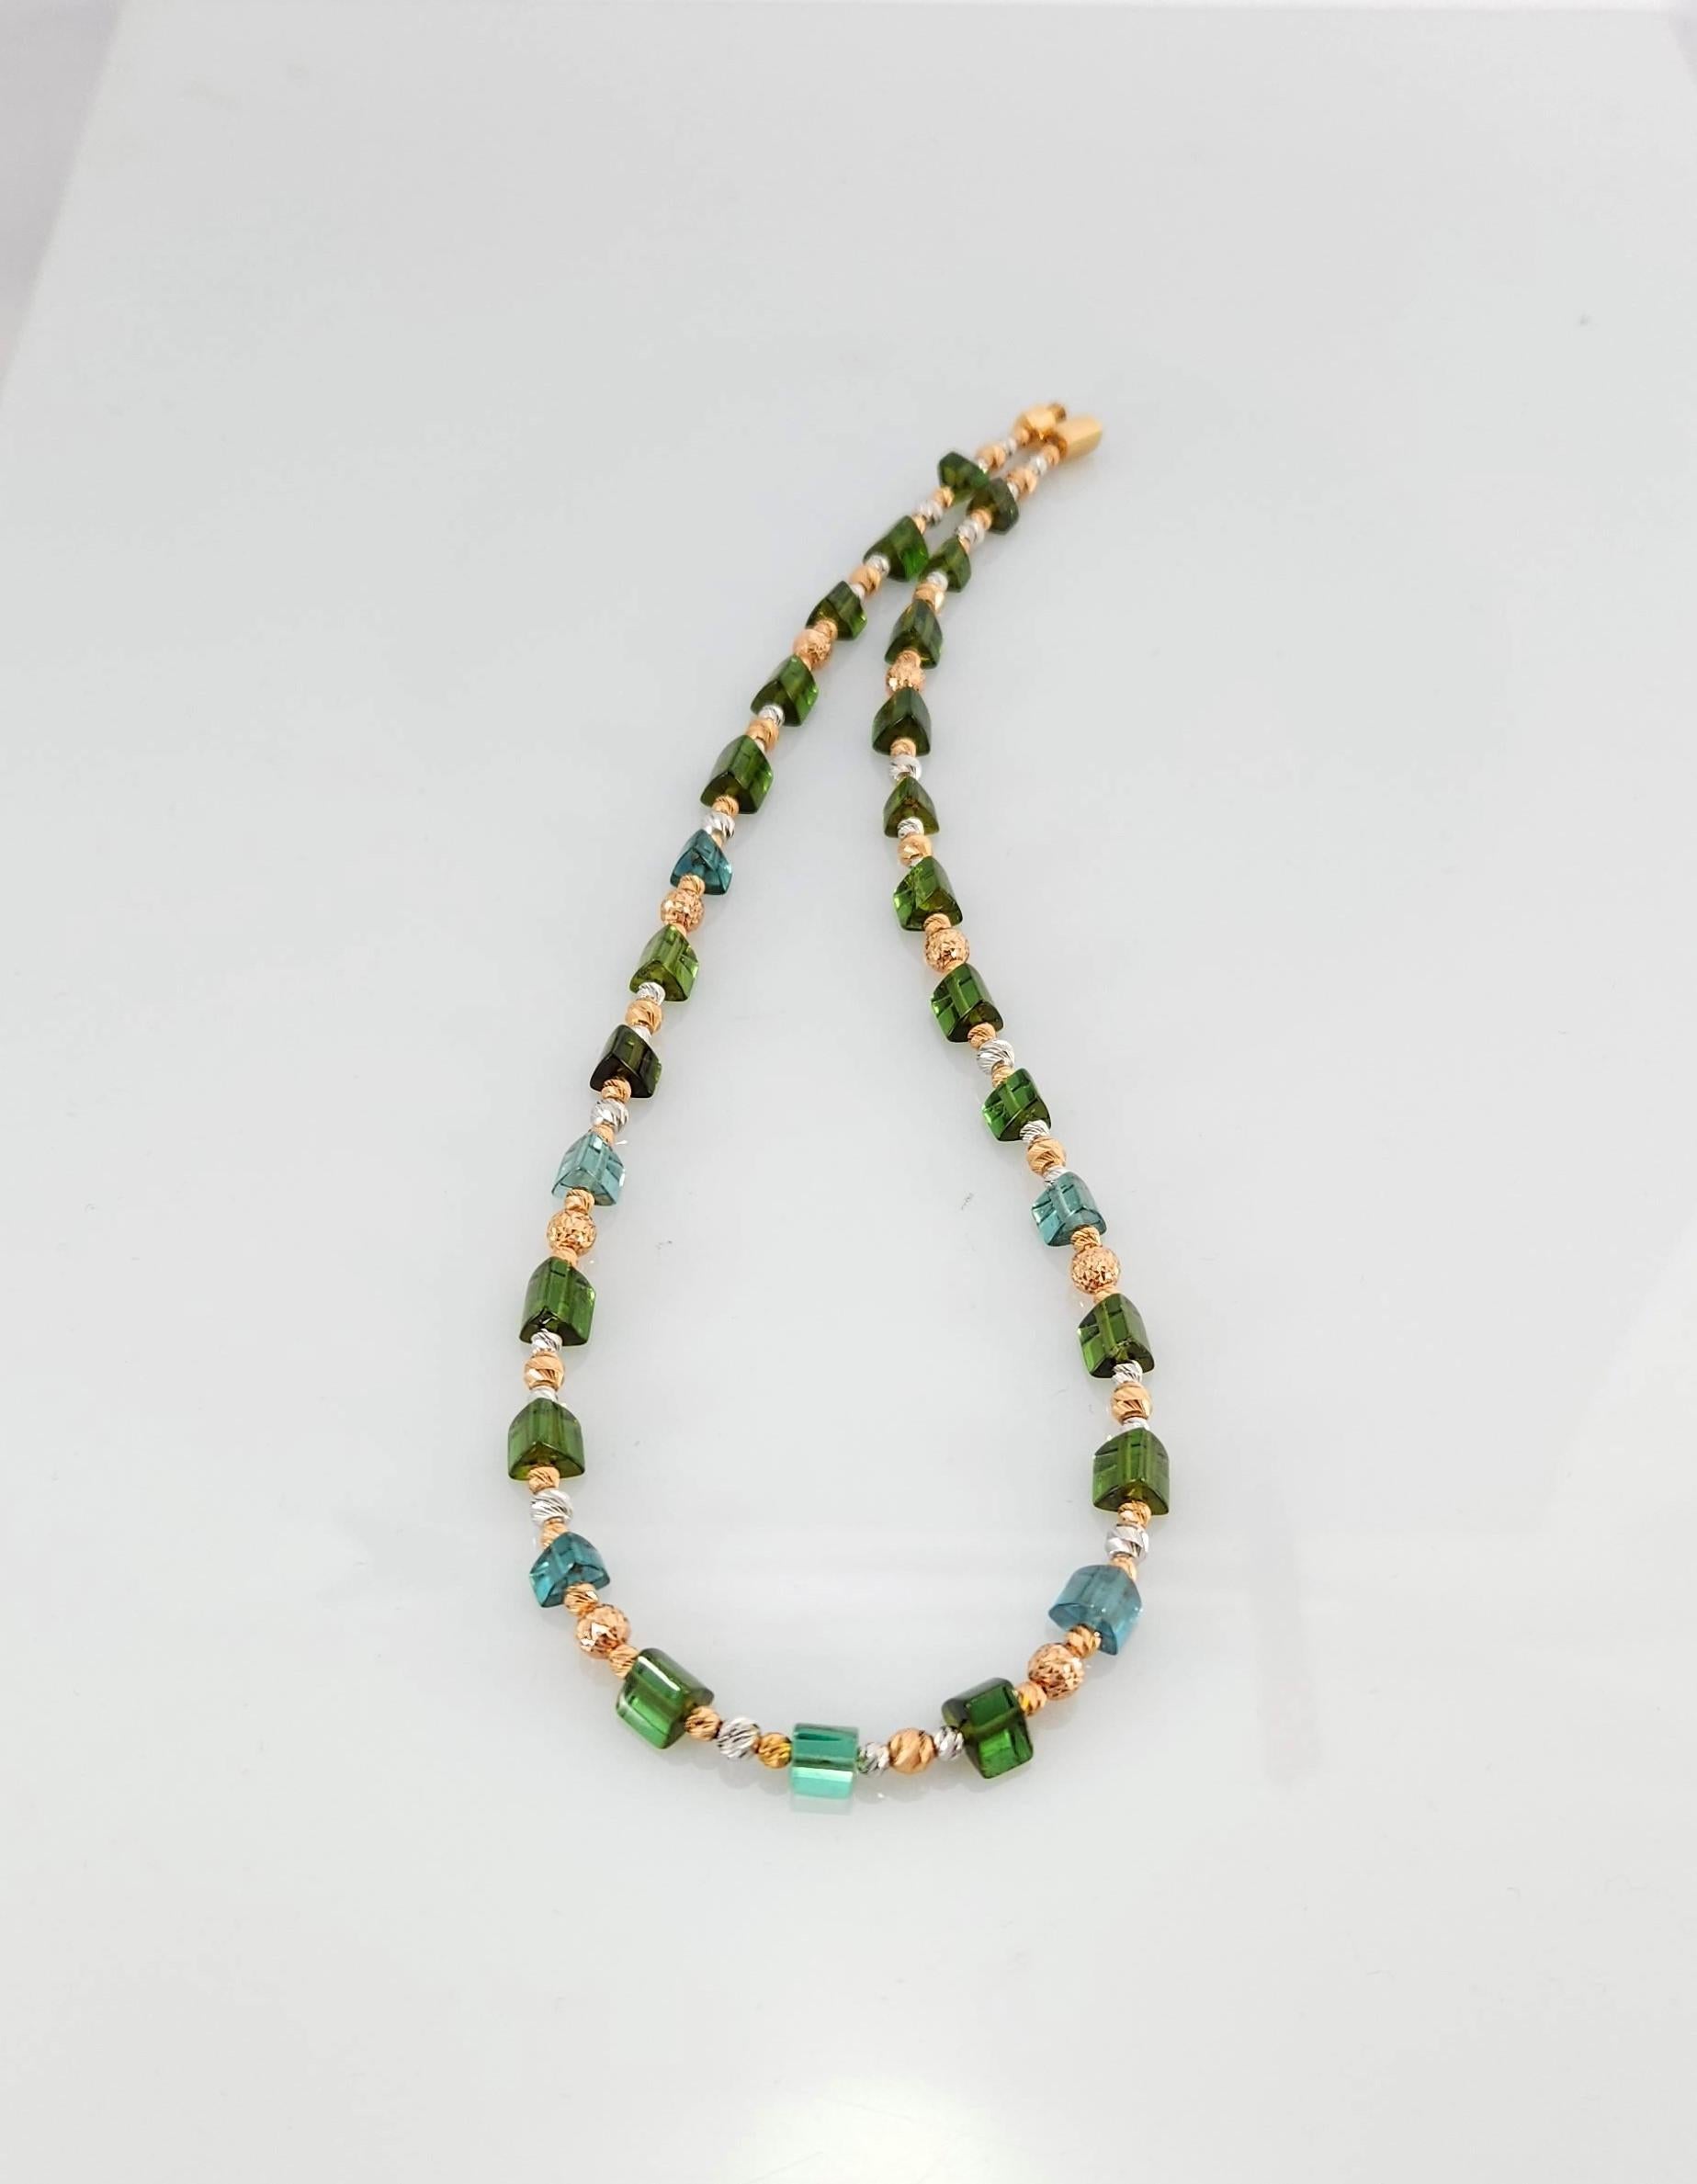 Green-Blue Tourmaline Crystal Beaded Necklace with 18 Carat Gold For Sale 6